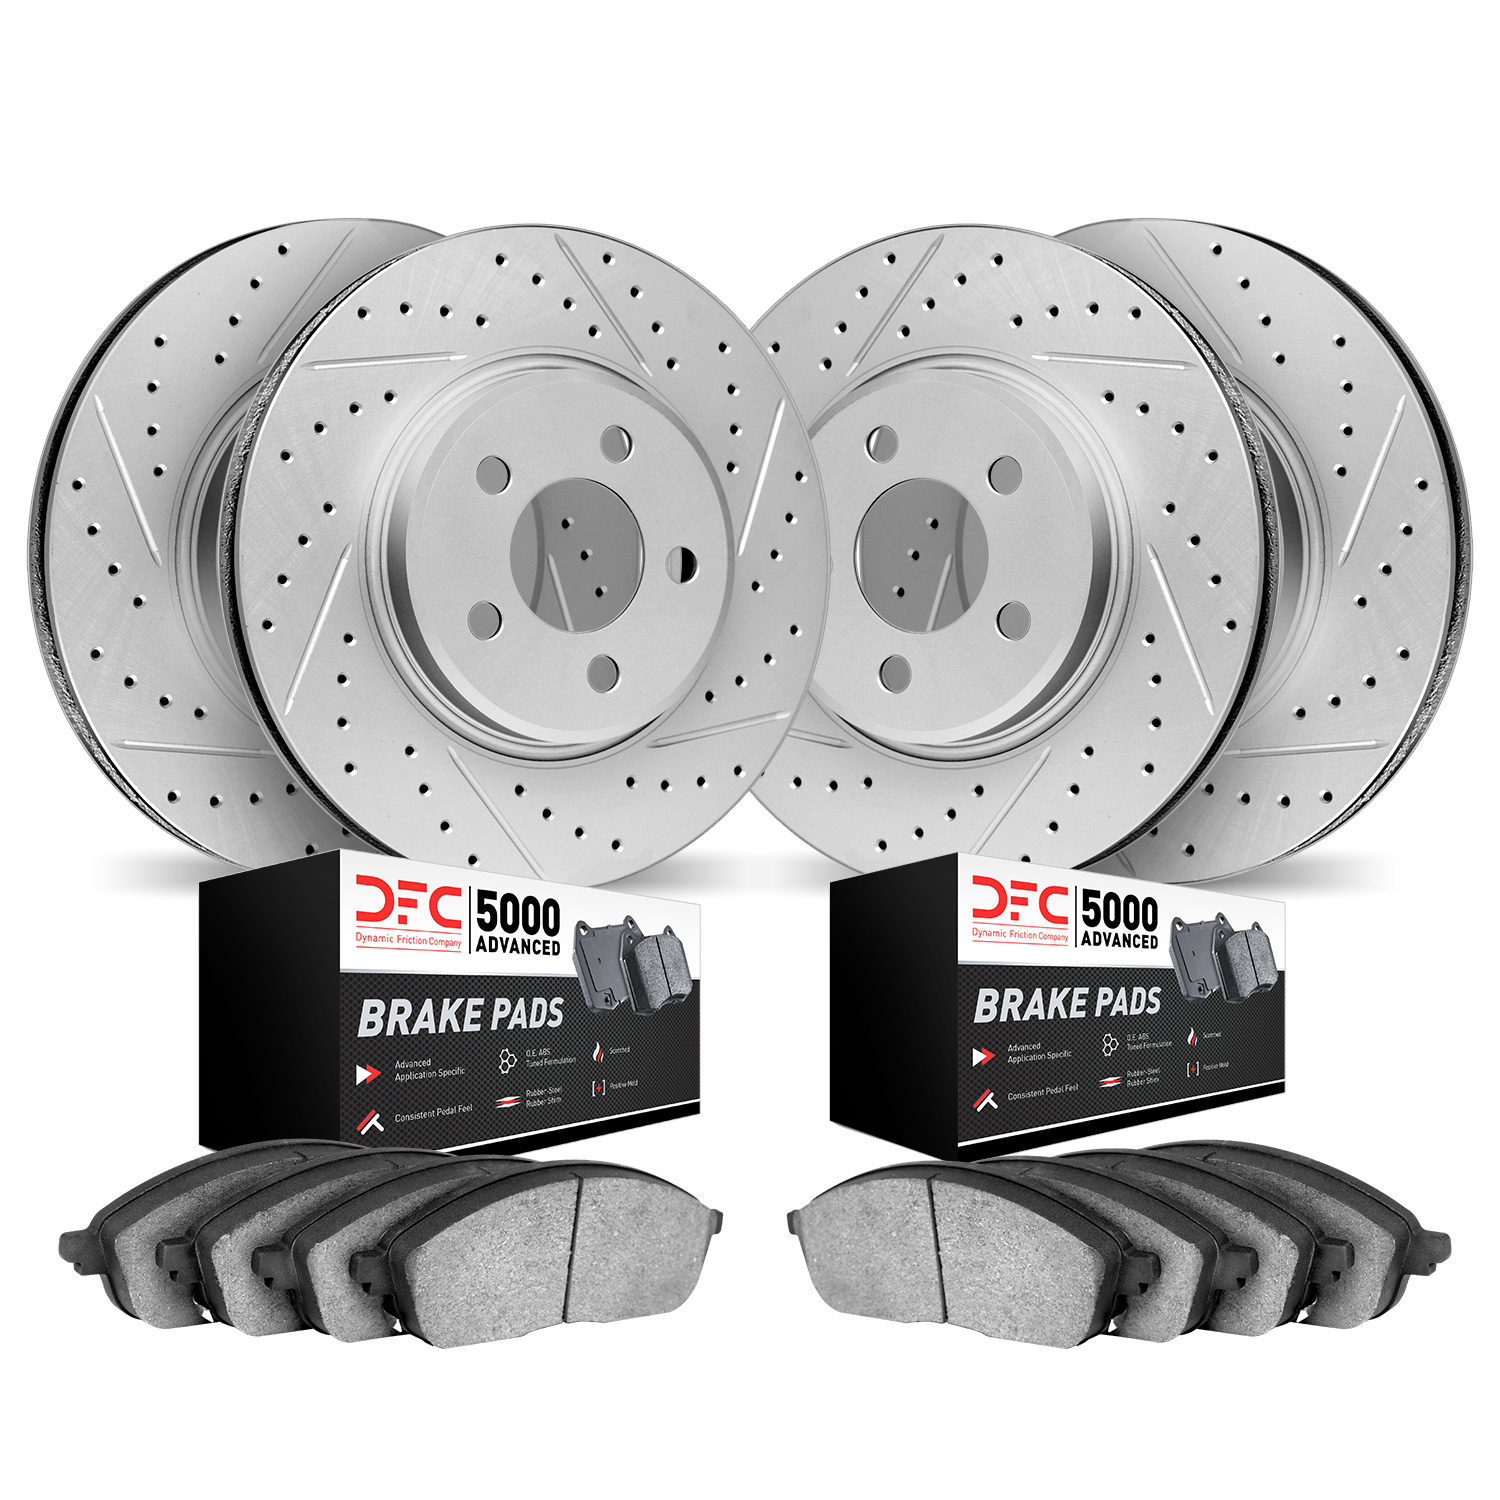 2504-11004 Geoperformance Drilled/Slotted Rotors w/5000 Advanced Brake Pads Kit, 2014-2017 Land Rover, Position: Front and Rear